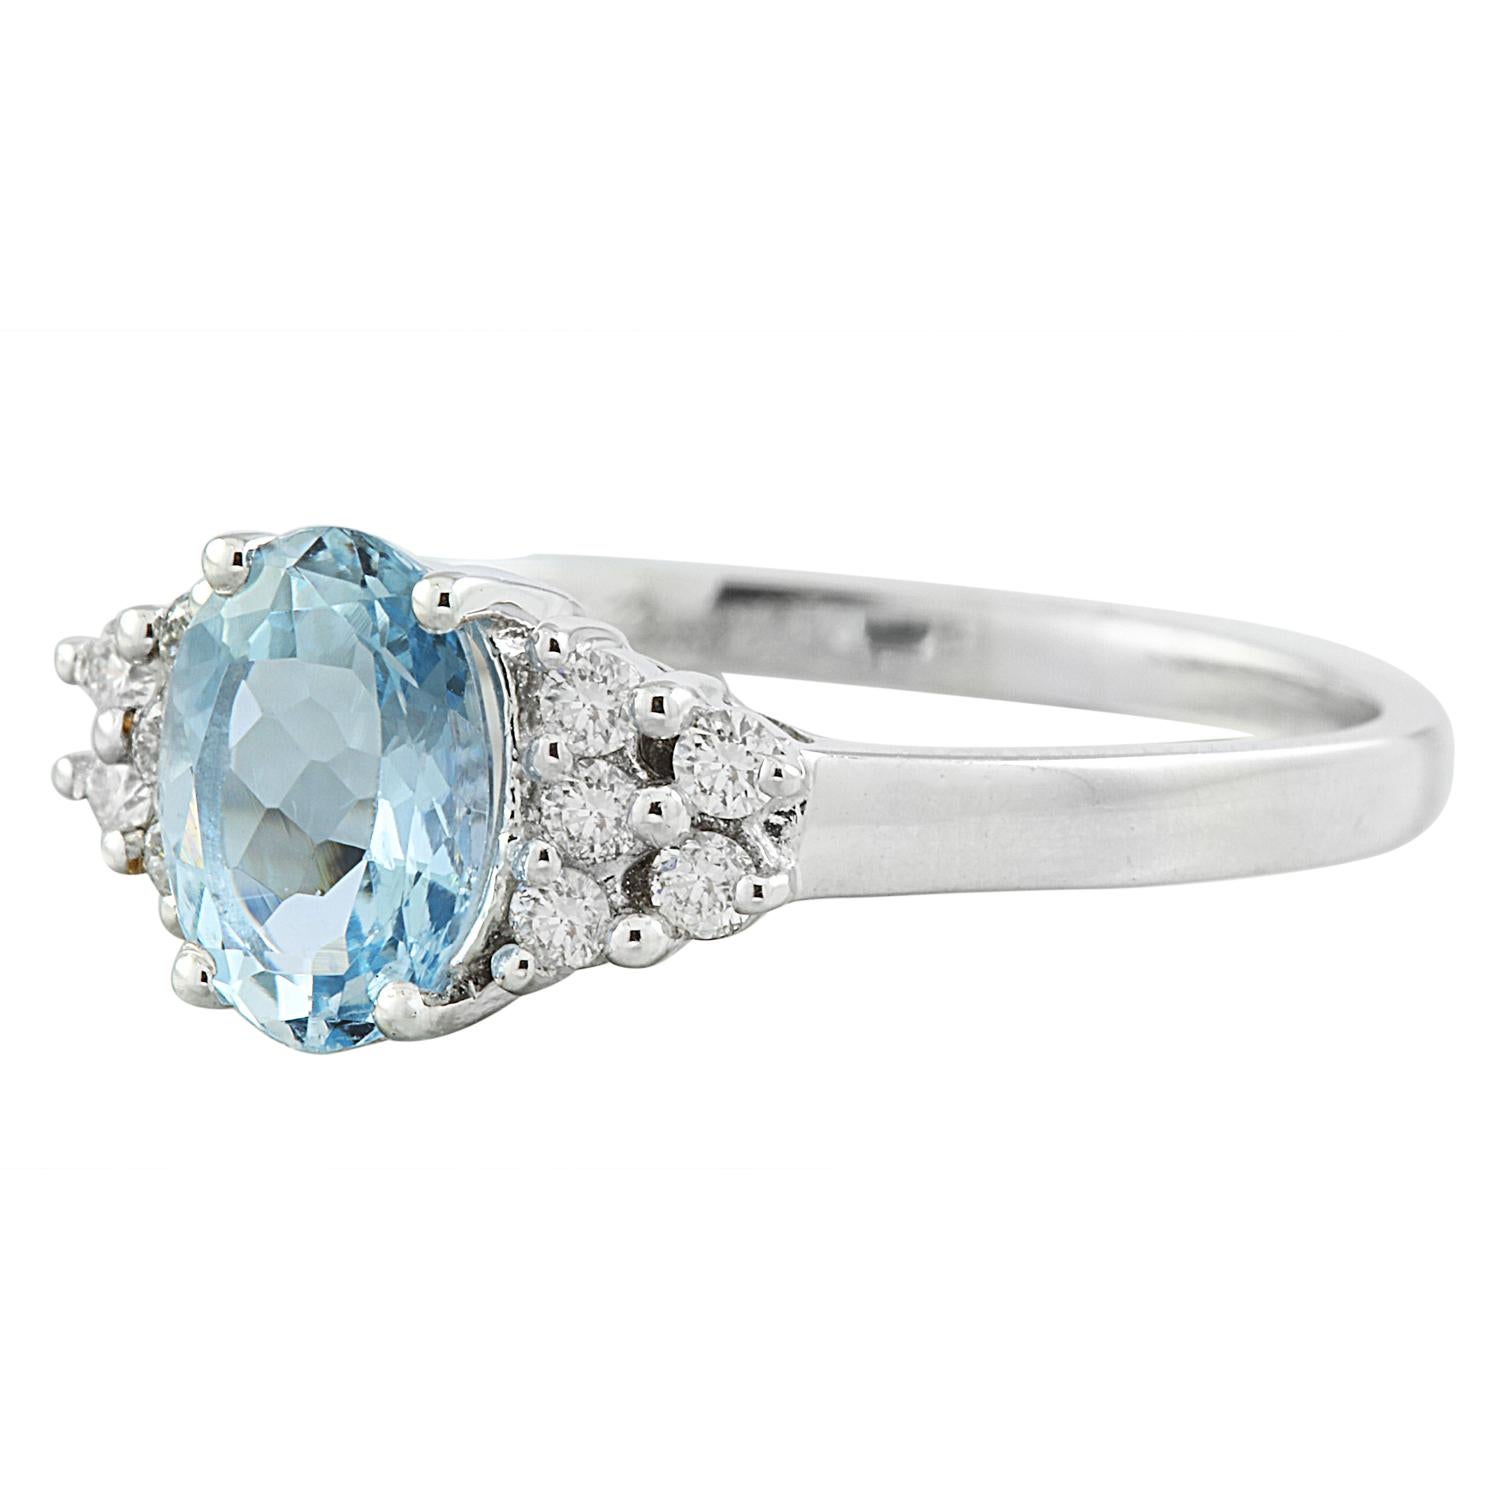 Introducing a stunning 1.85 Carat Natural Sky Blue Topaz 14K Solid White Gold Diamond Ring. 
With a total weight of 2.8 grams, this ring boasts 1.59 carat Natural Sky Blue Topaz, measuring 8.00x6.00 millimeters, radiating a mesmerizing hue. With